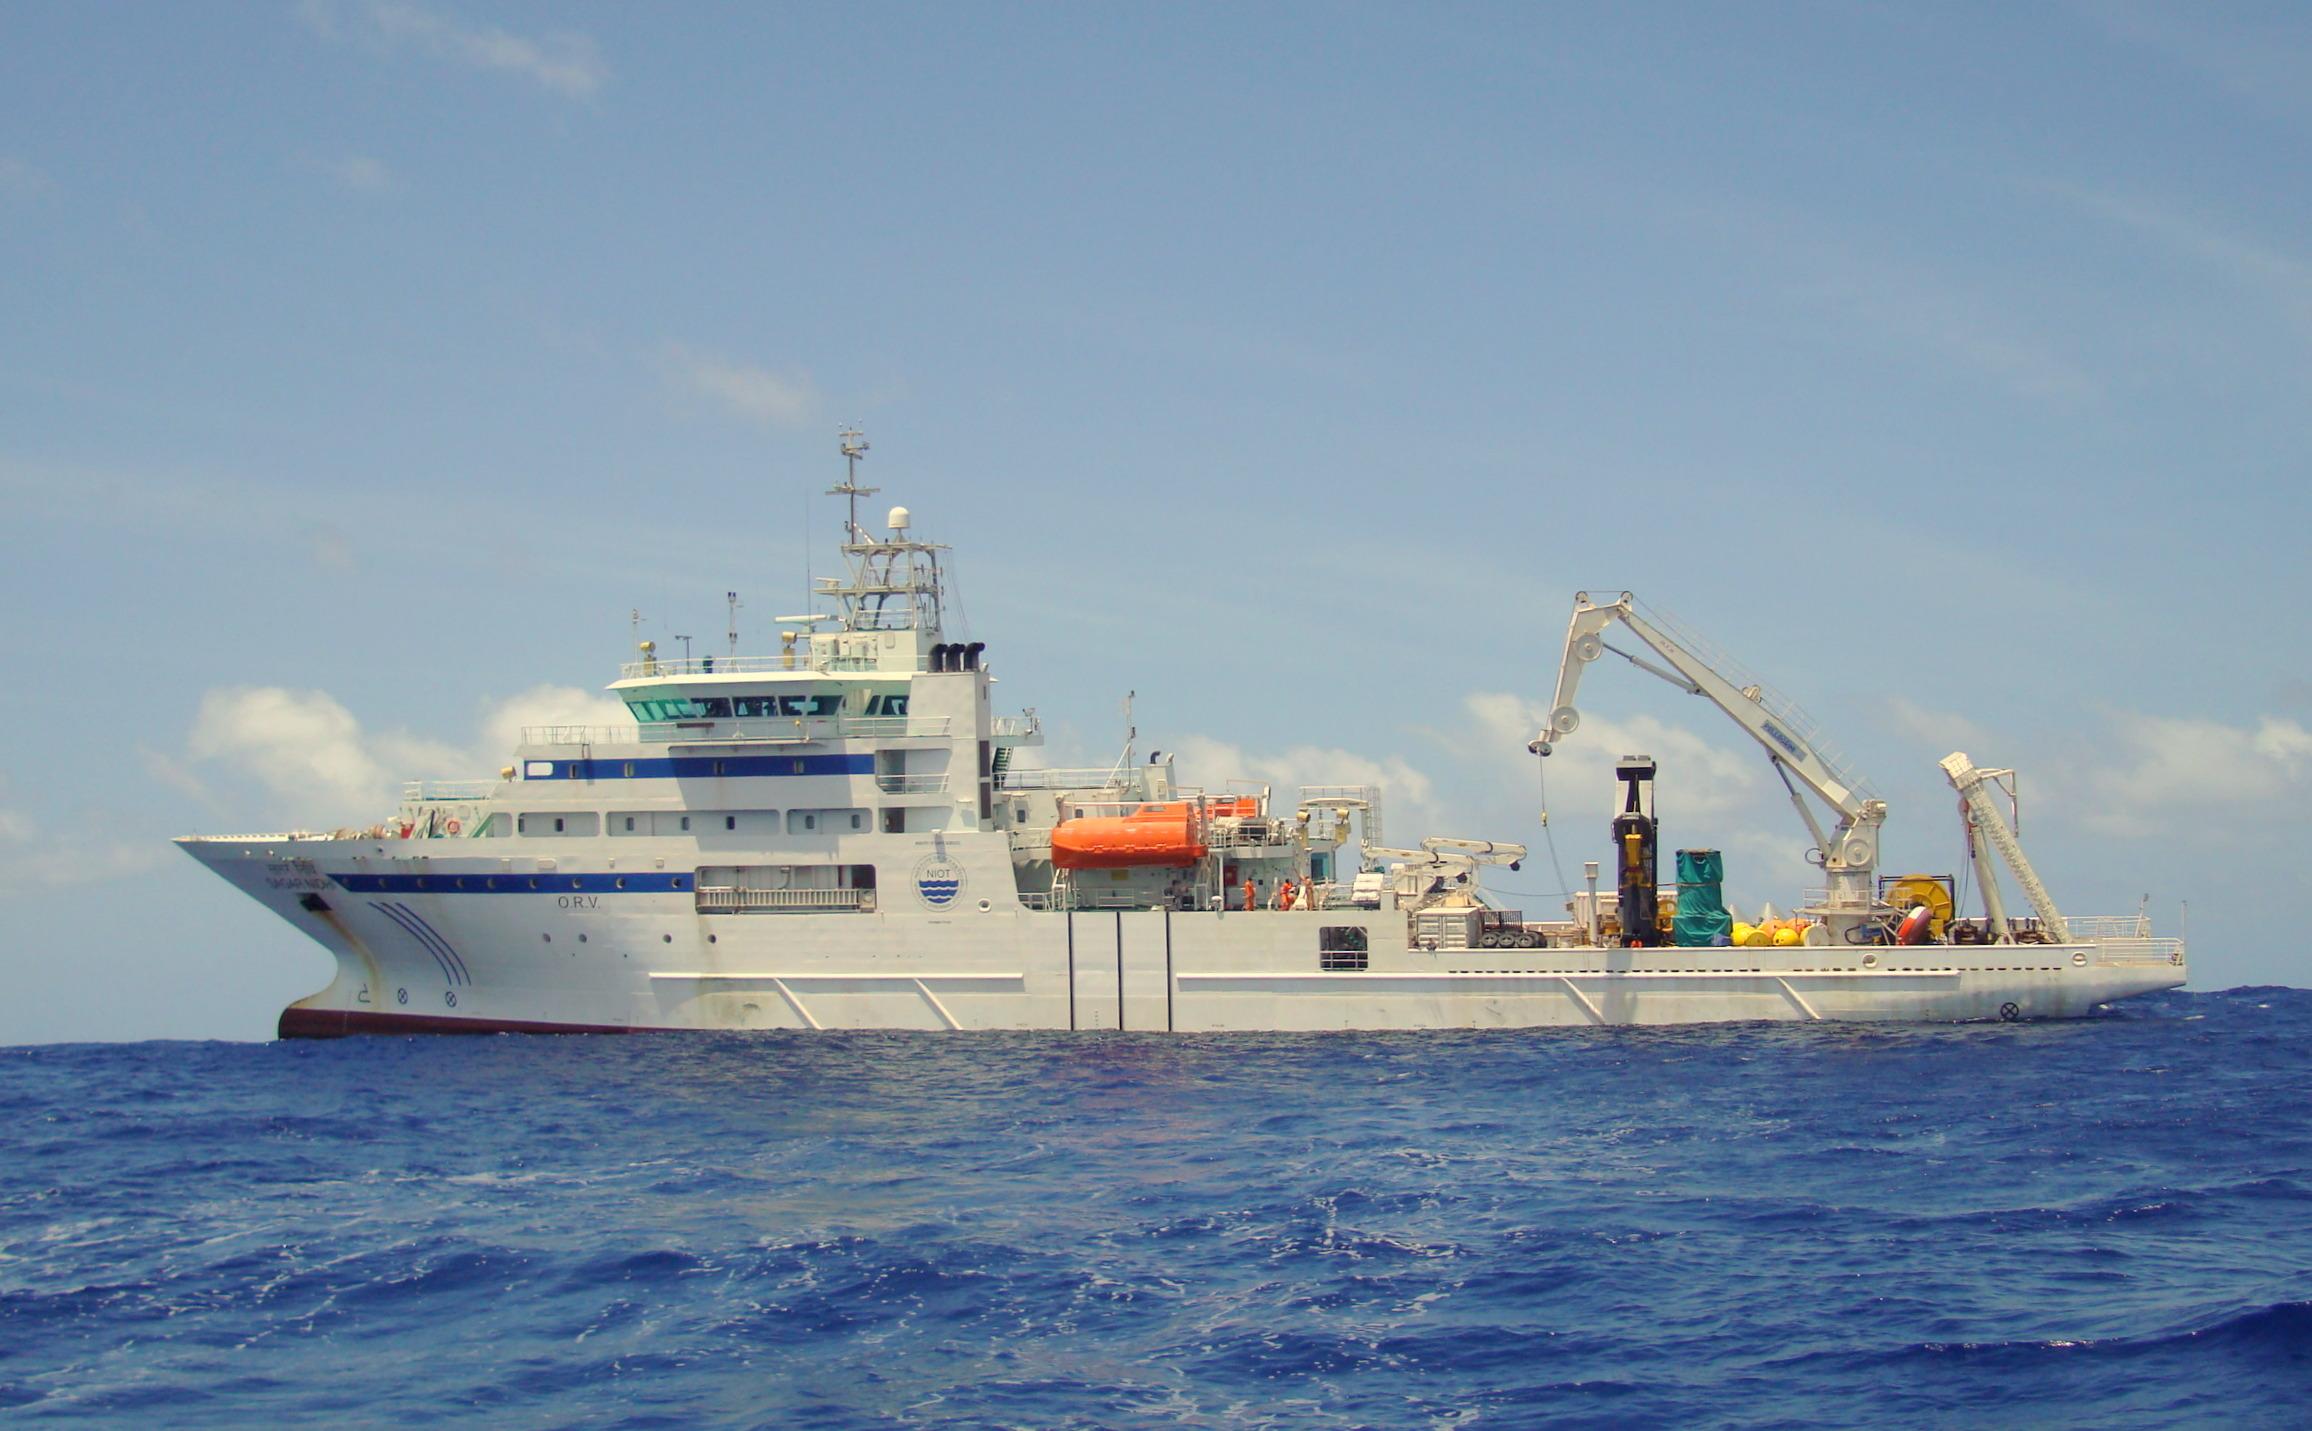 Scientists embark on expedition onboard India's research vessel Sagar Nidhi_30.1